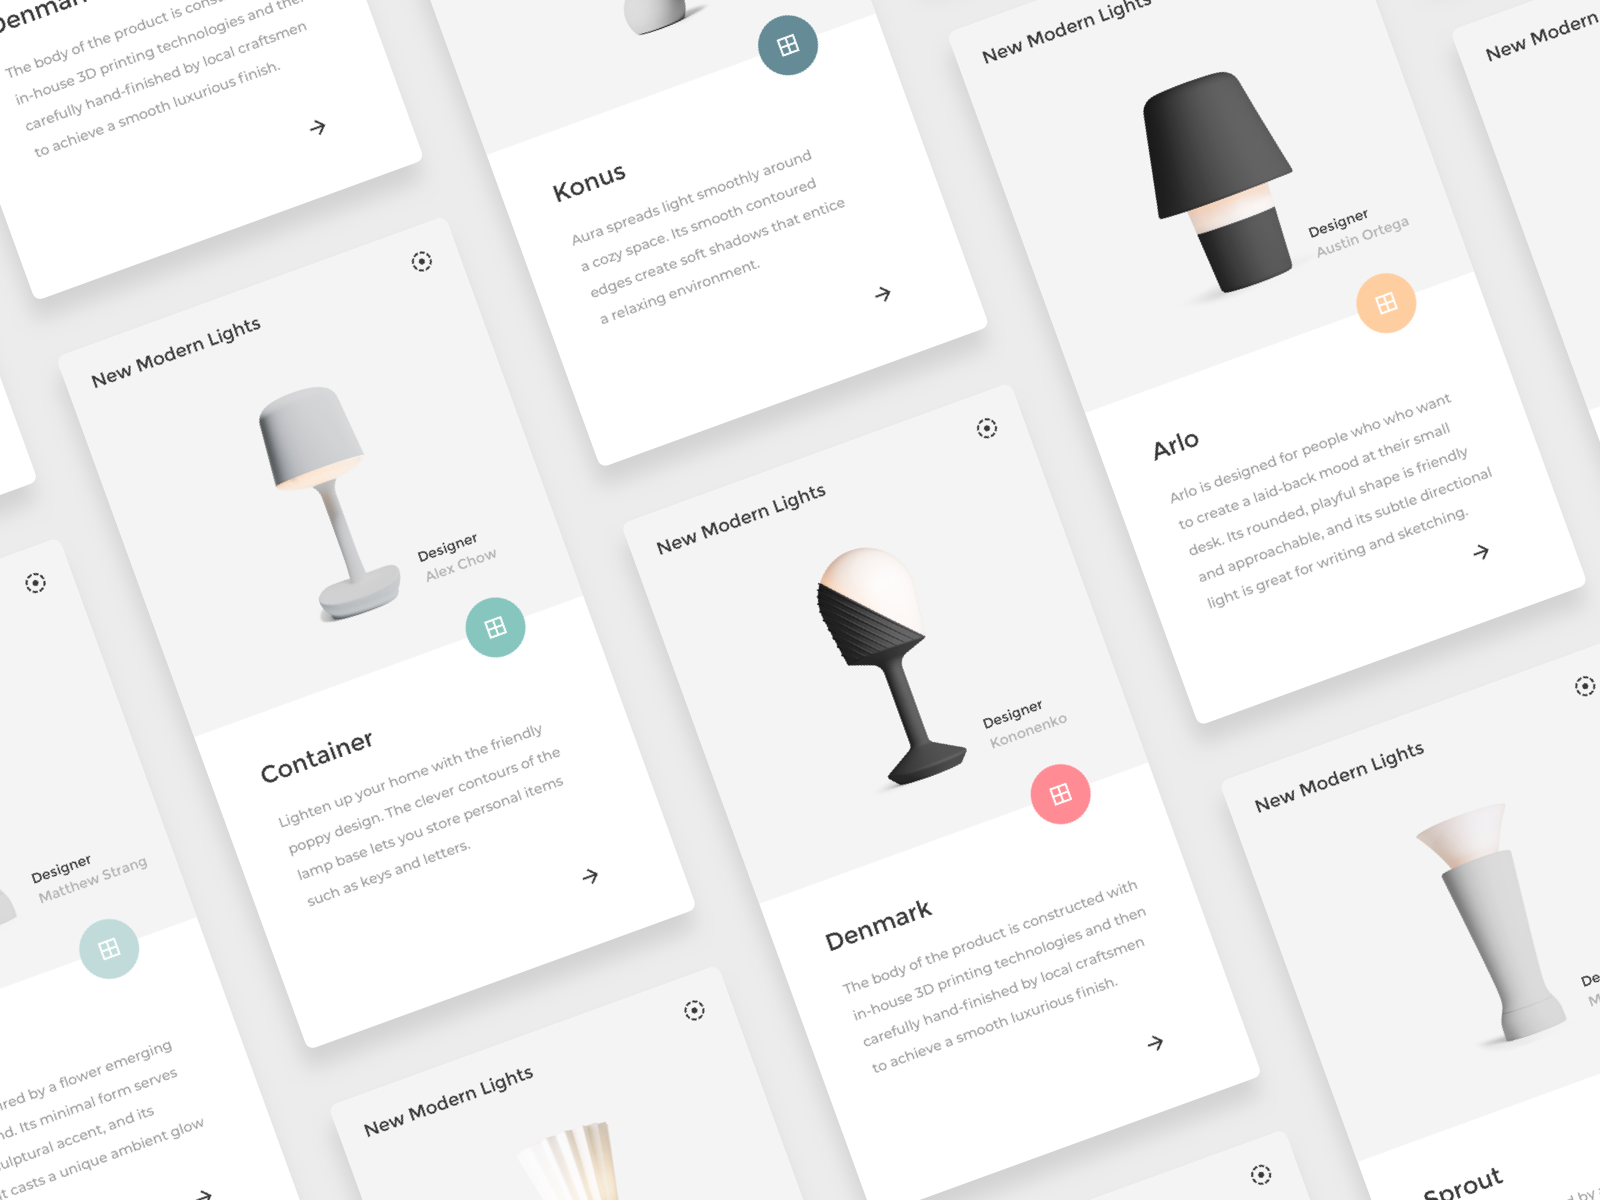 Product Card. Product Card UI. Карточка товара UI UX. Product Card Design. Product card view viewid